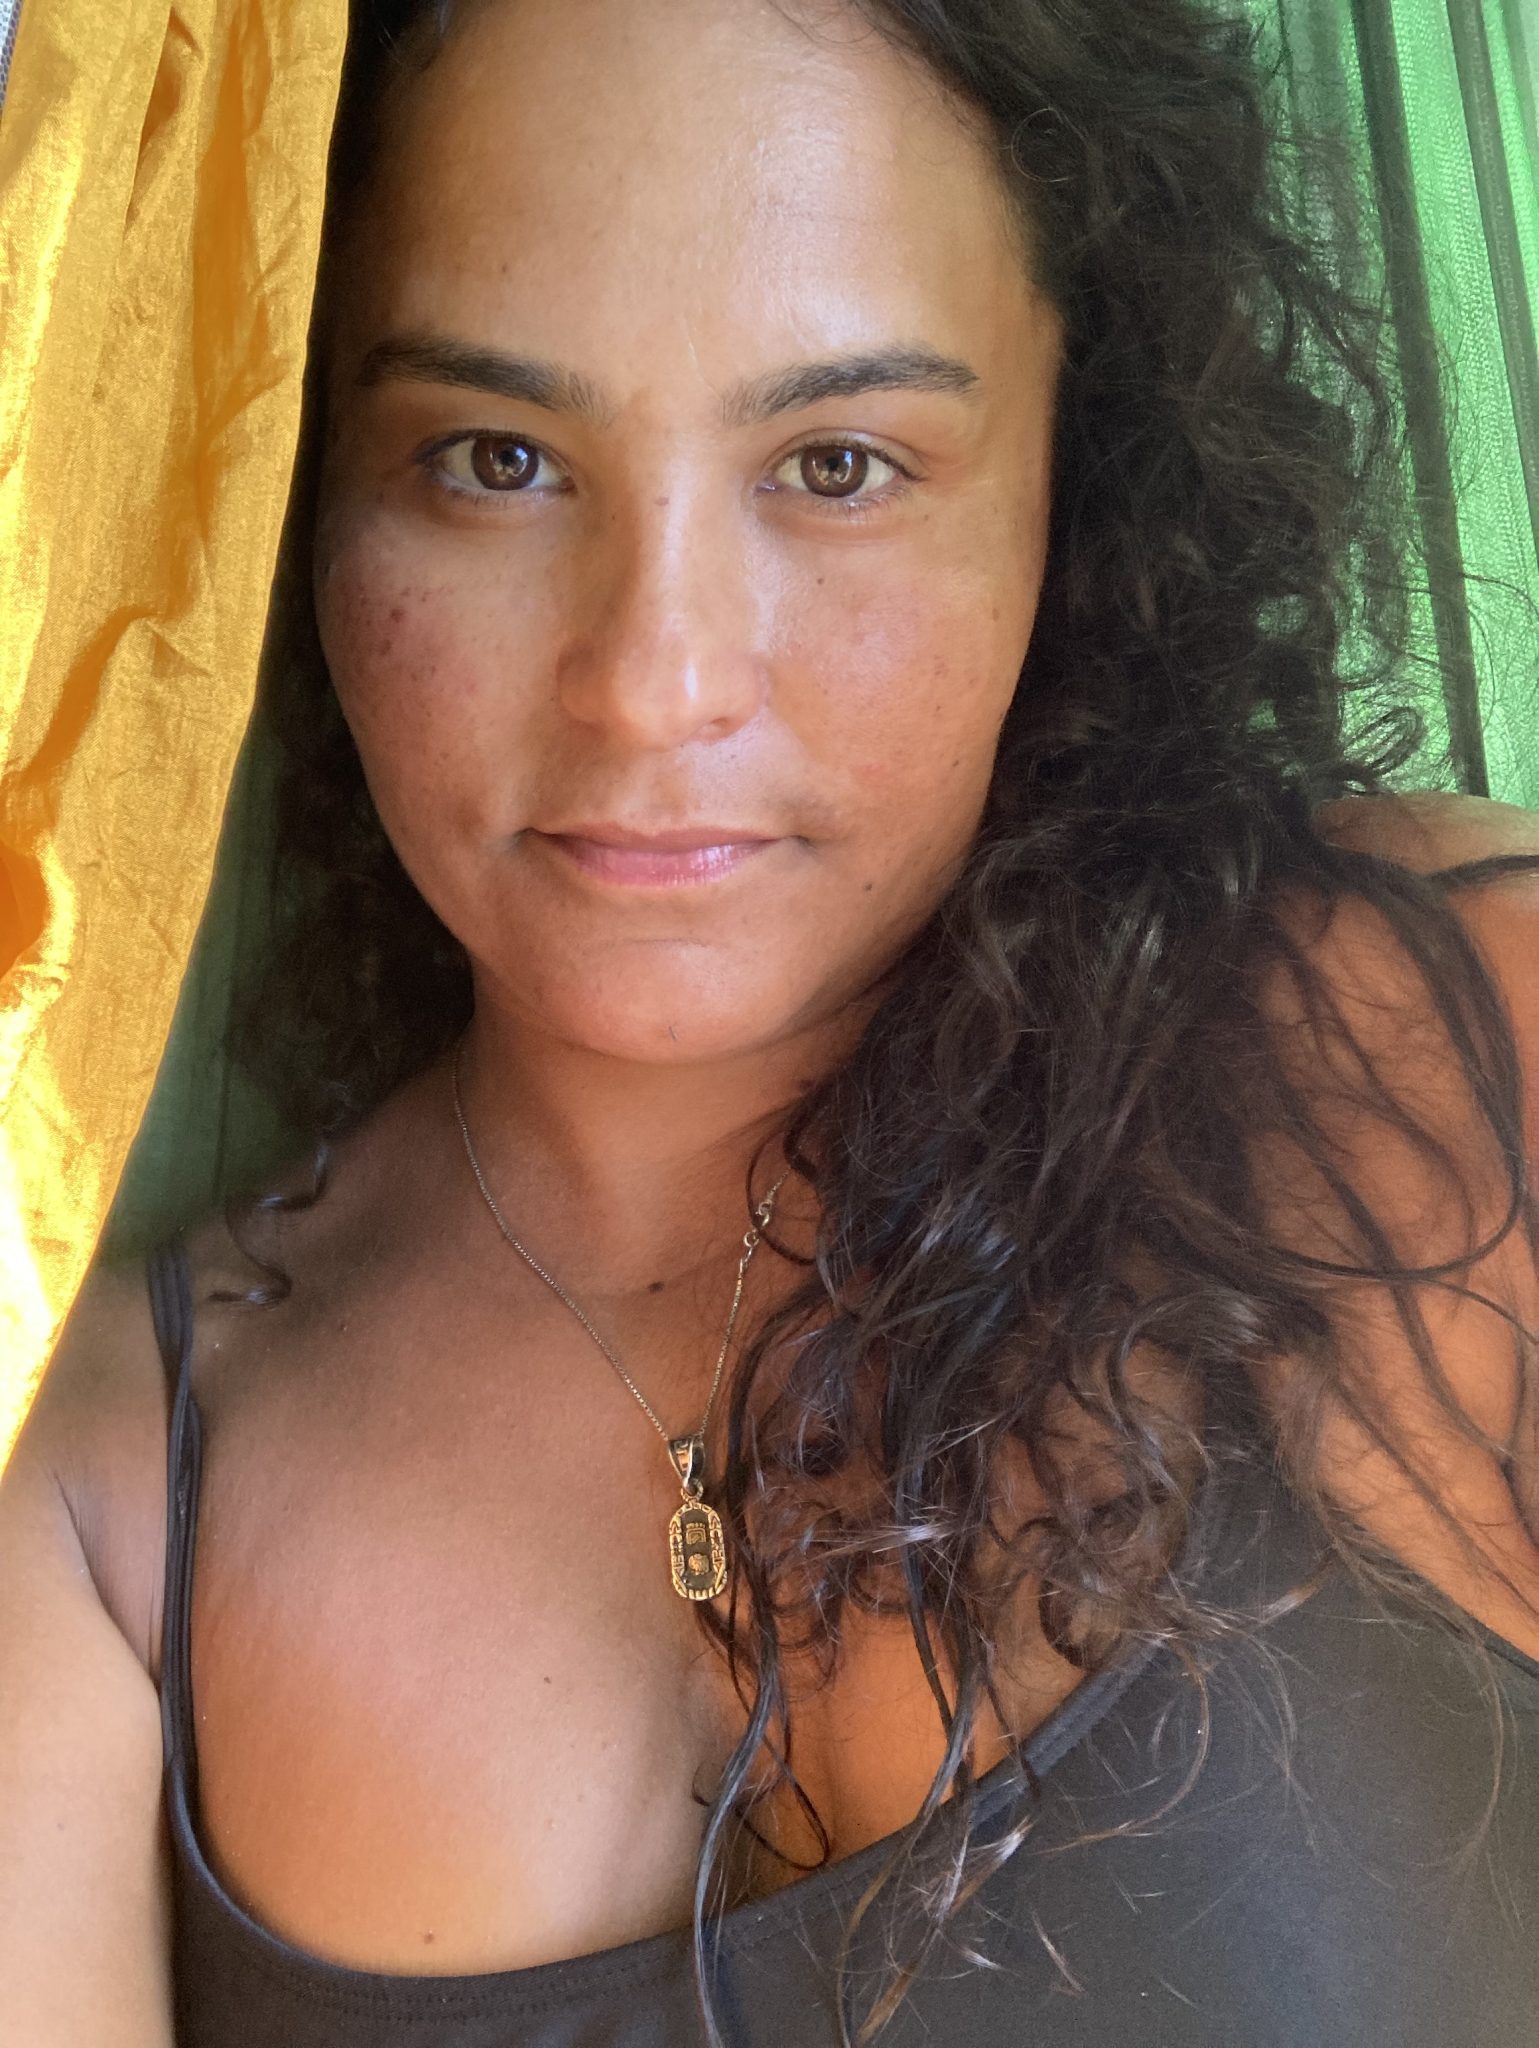 Stephanie Bastos take a selfie; she/her from Miami, FL originally Tequesta land, daughter of Brazilian immigrant parents